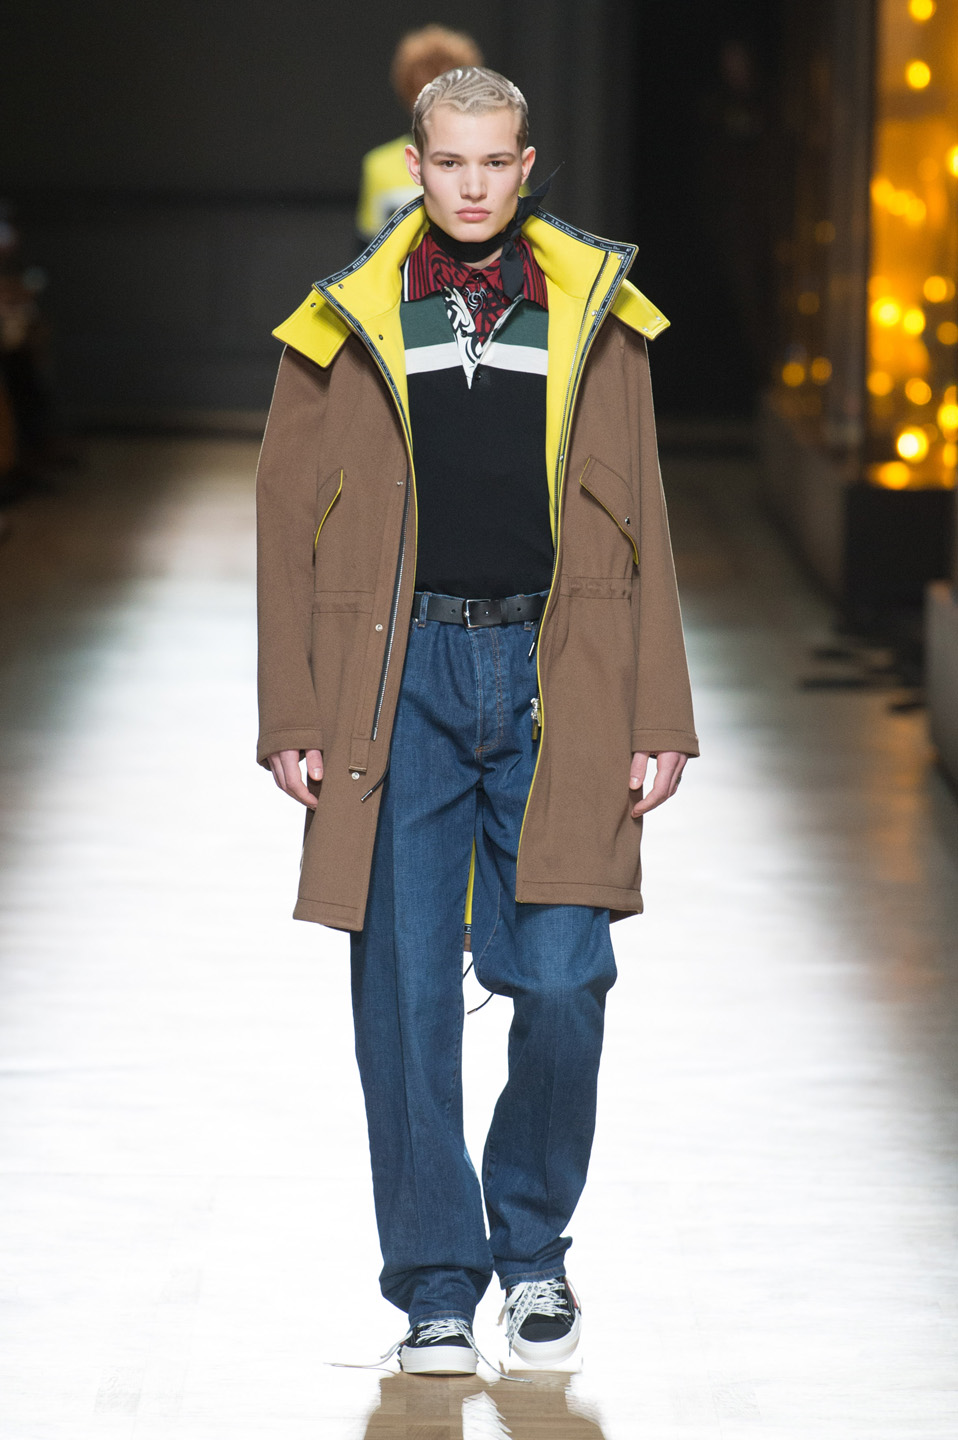 DIOR HOMME WINTER 18 19 BY PATRICE STABLE look33 Fall/WInter 2018 runway